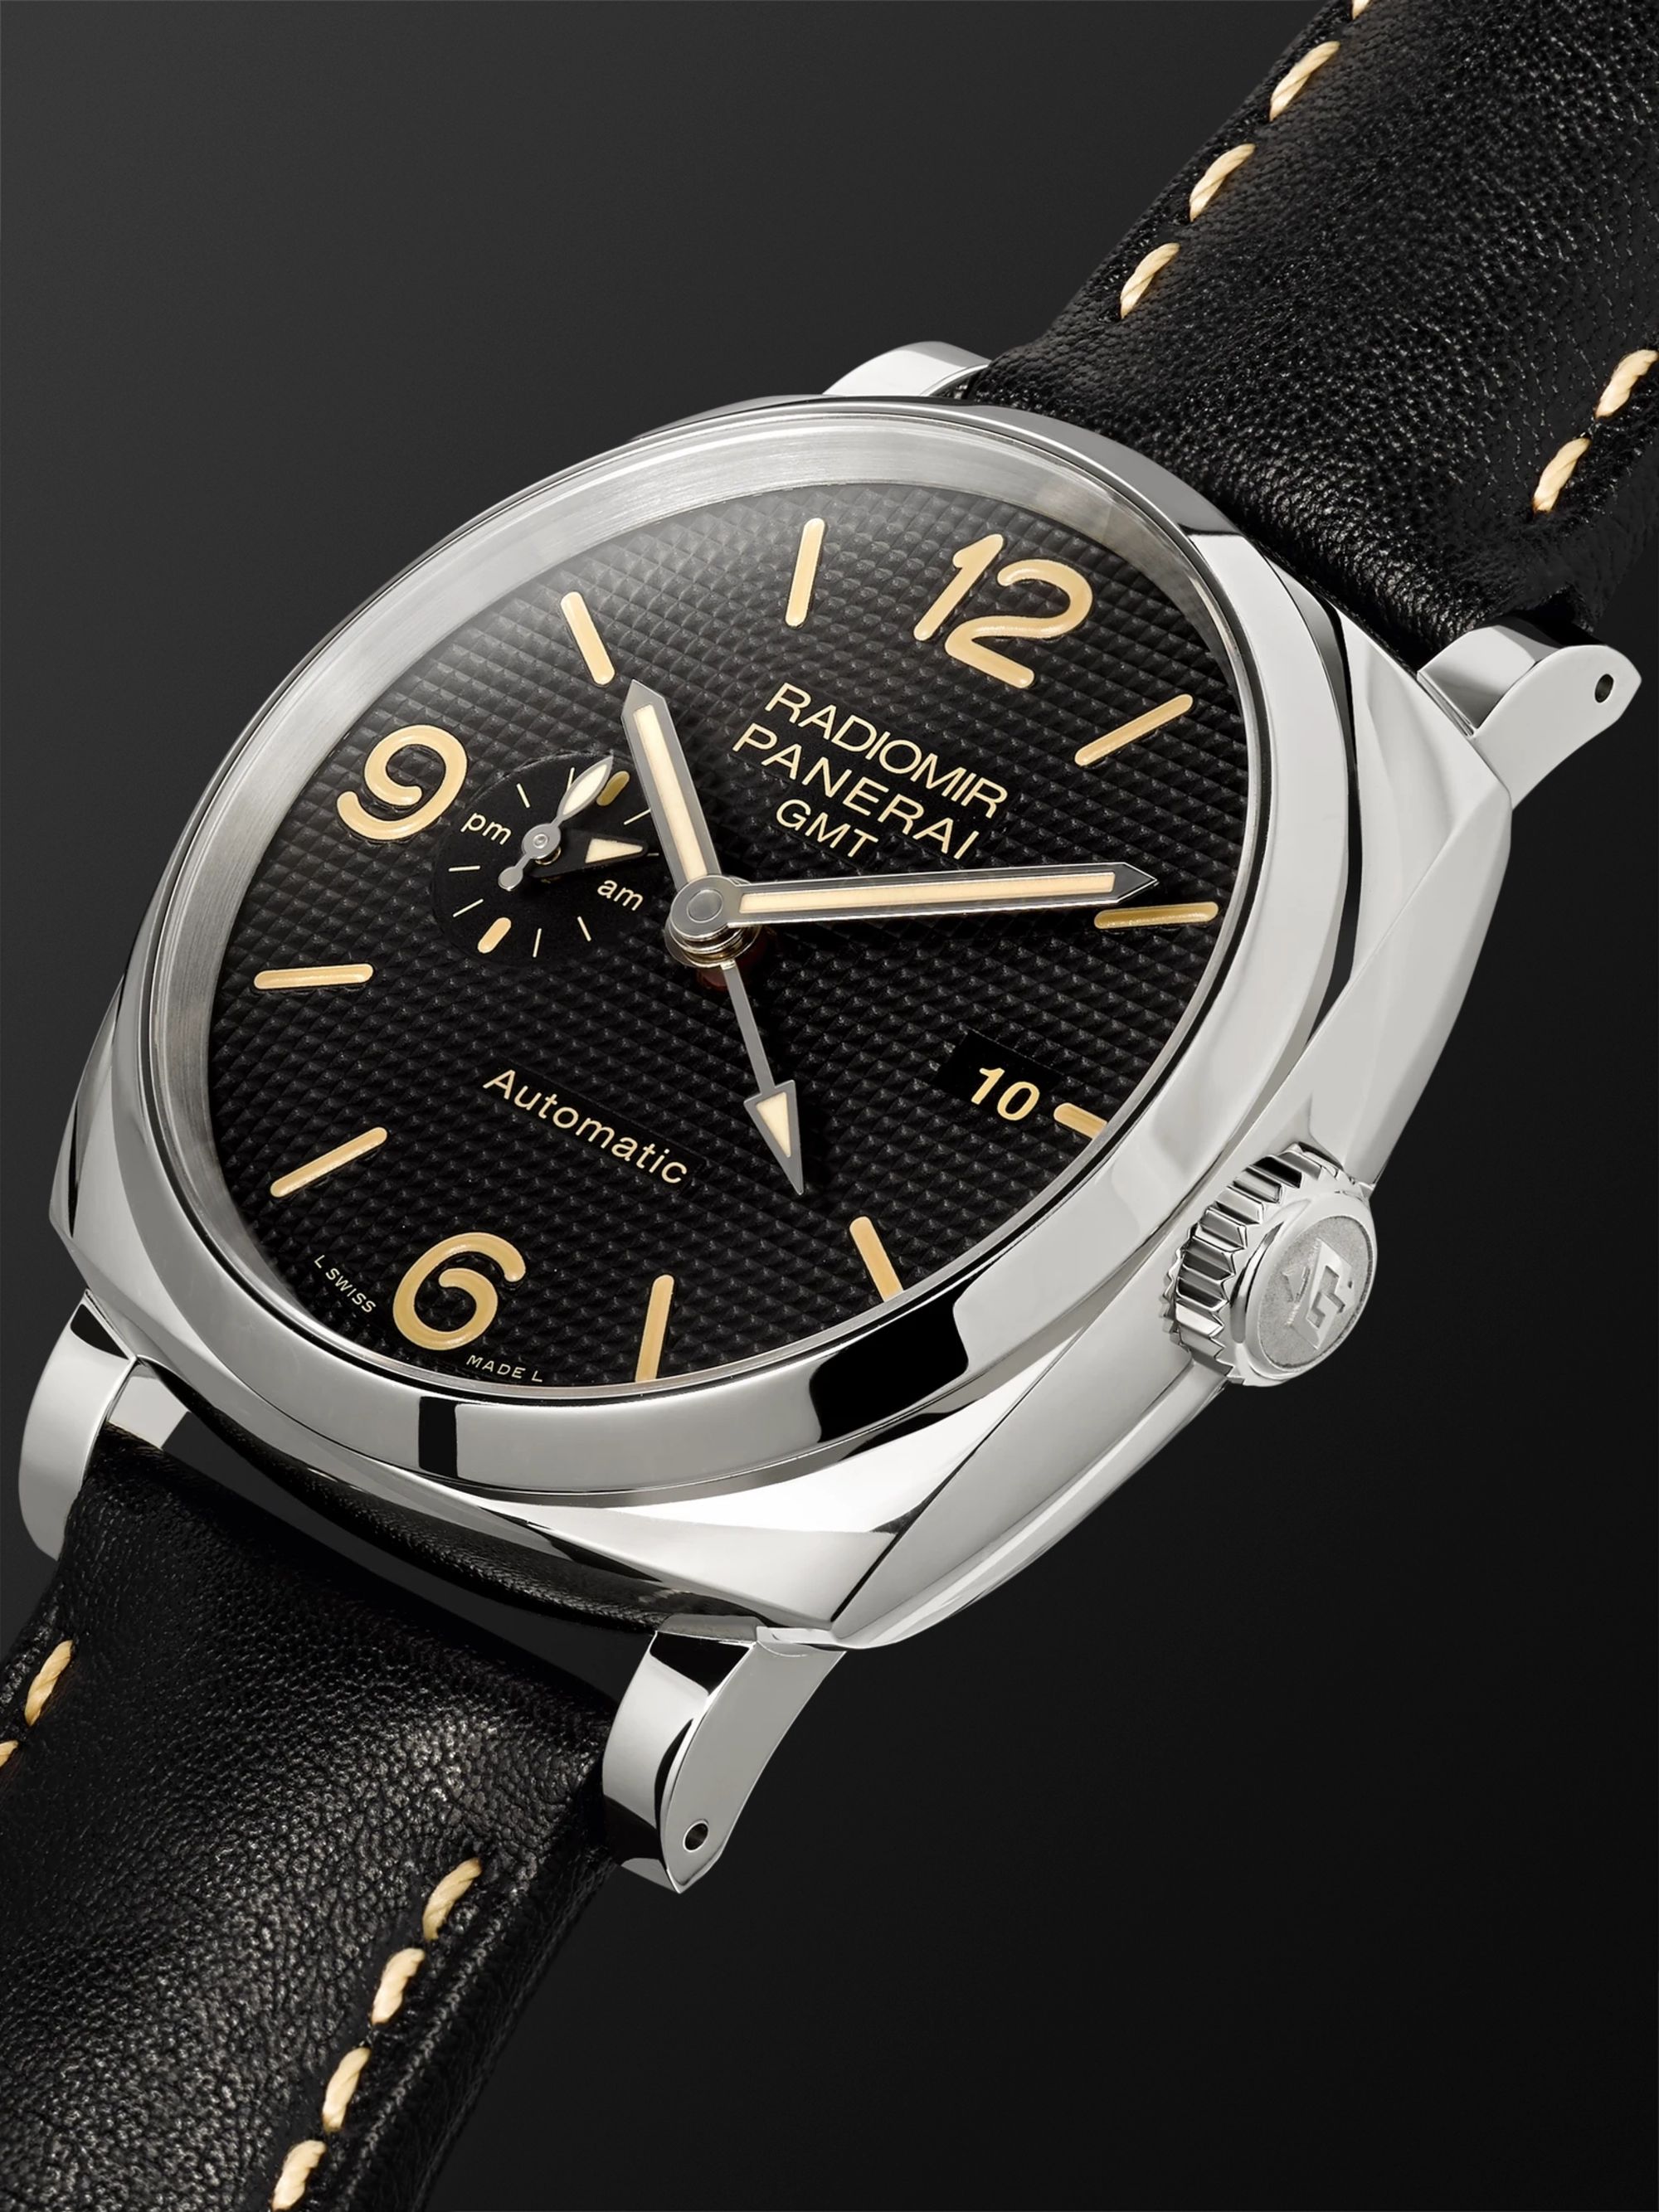 PANERAI Radiomir 1940 3 Days GMT Automatic Acciaio 45mm Stainless Steel and Leather Watch, Ref. No. PAM00627